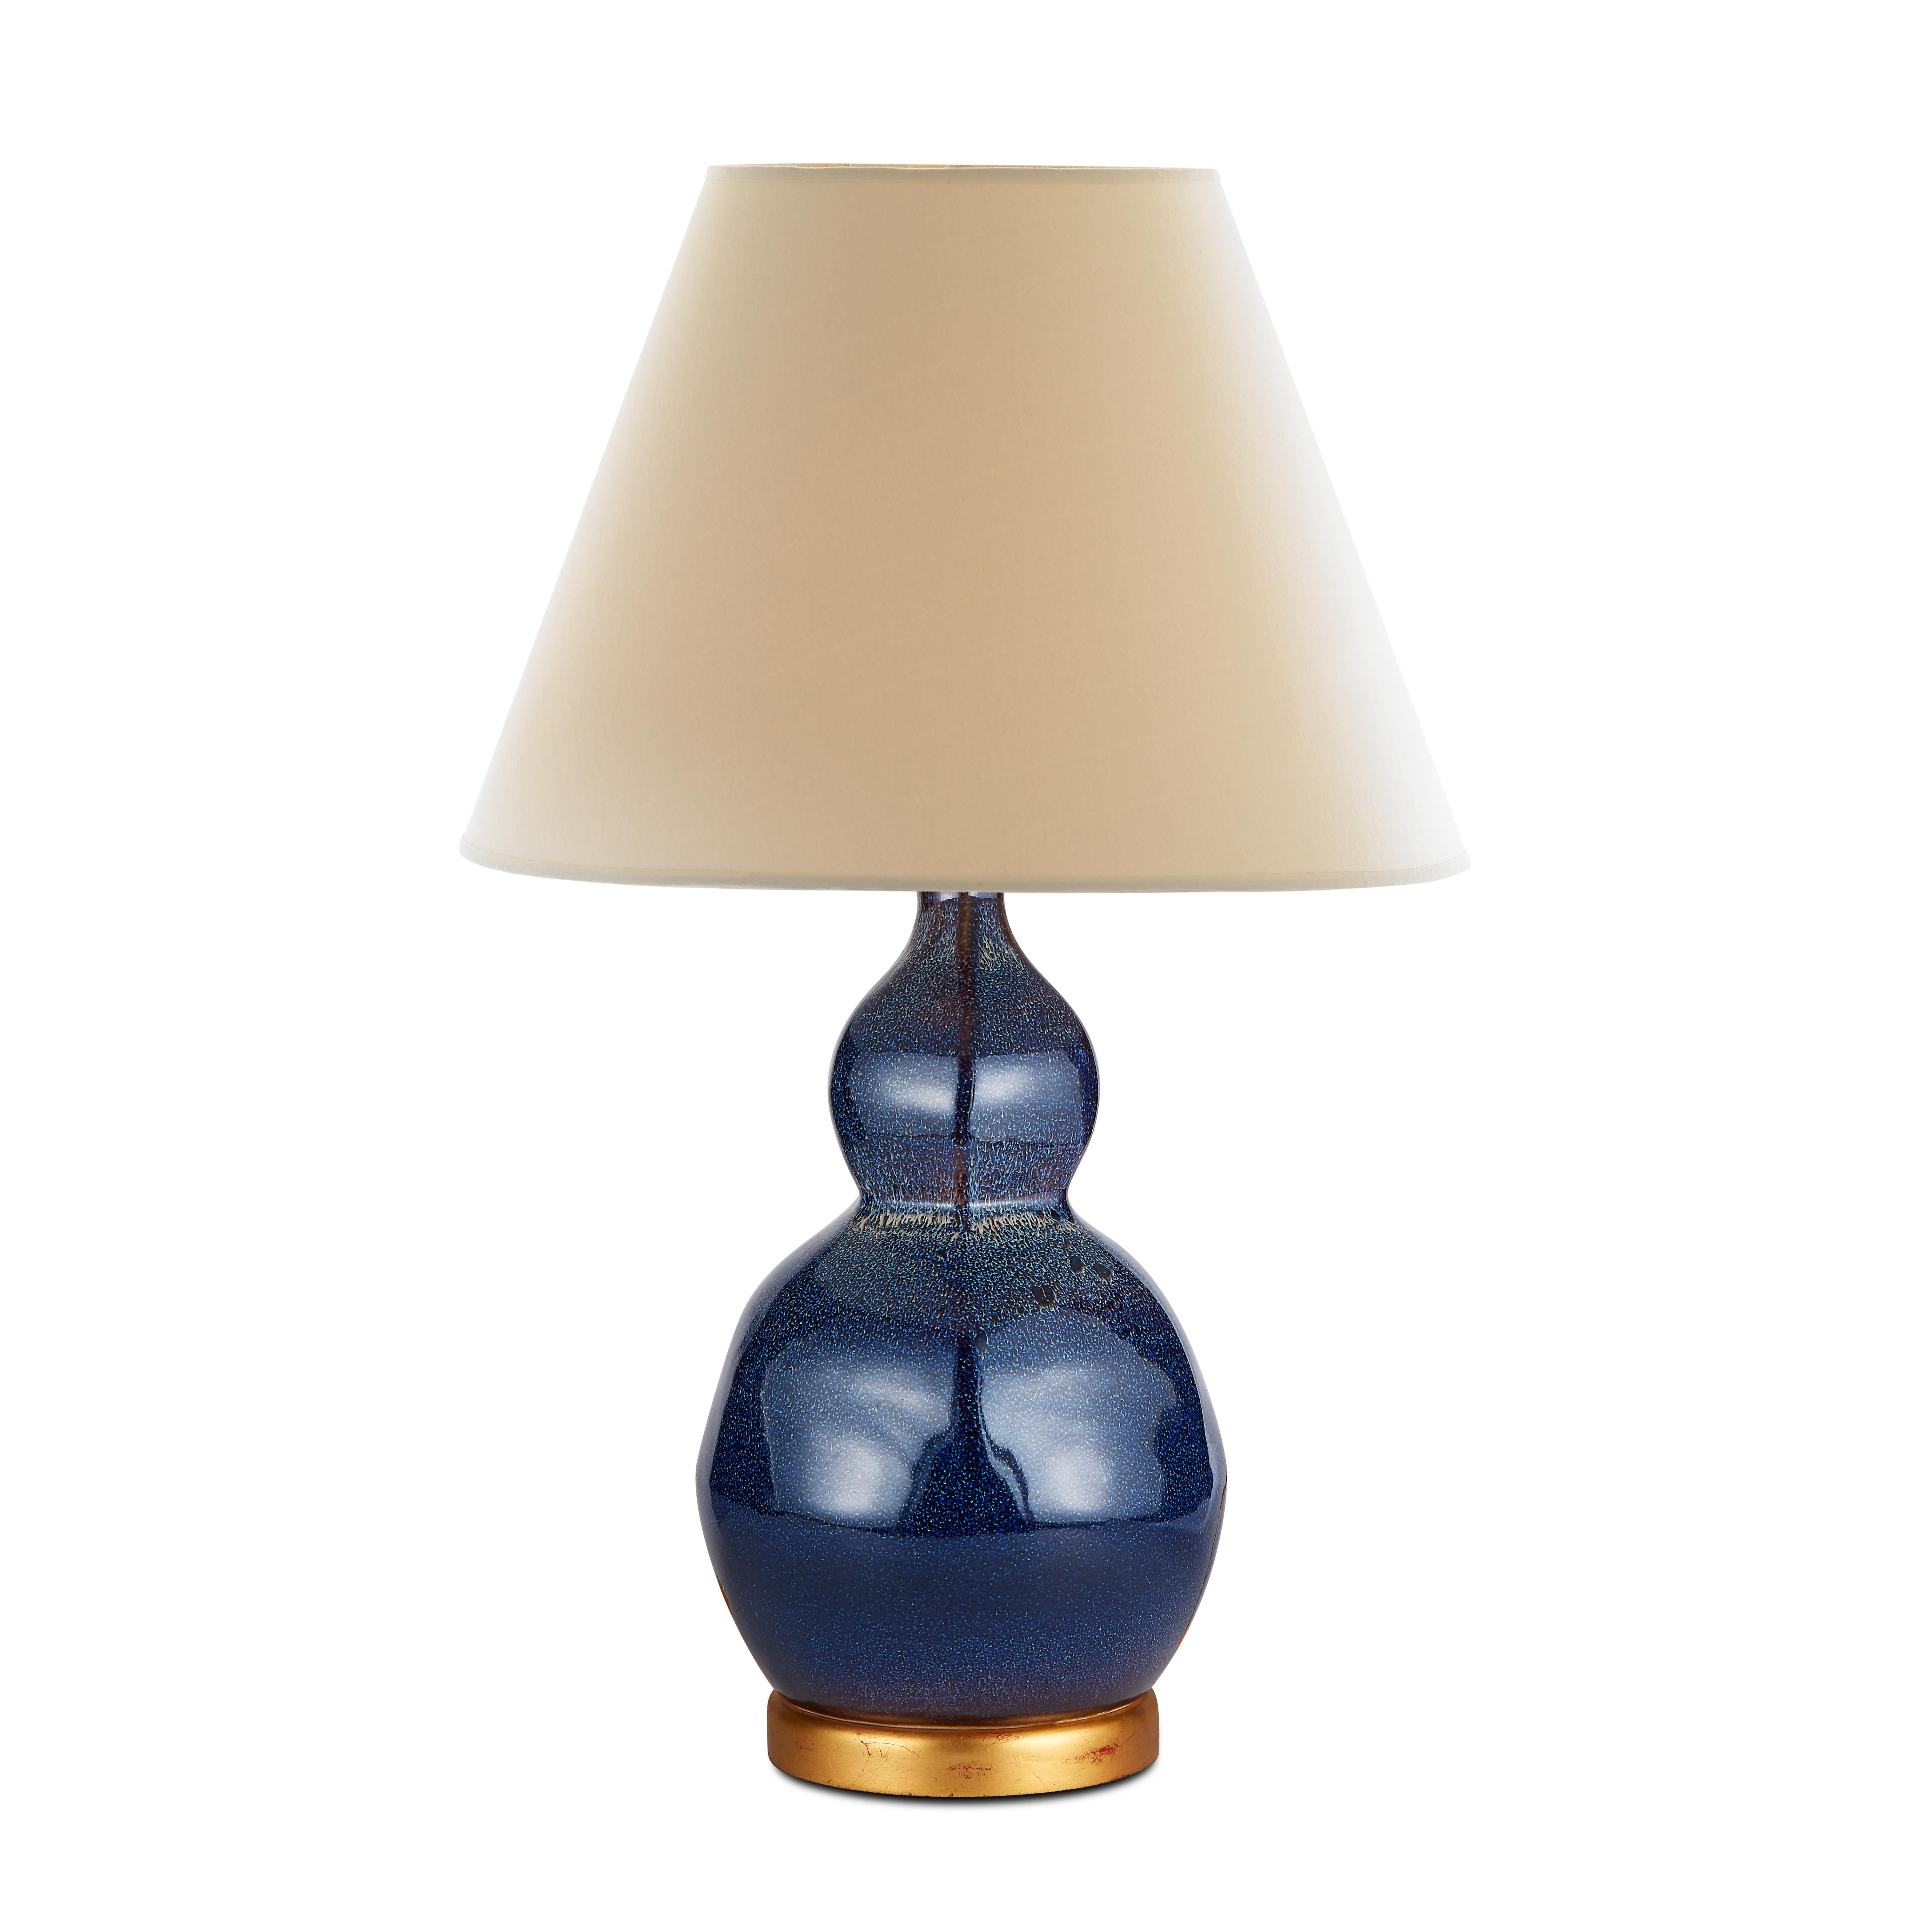 Chinese Bunny Williams Home Small Speckled Lamp (Indigo) For Sale